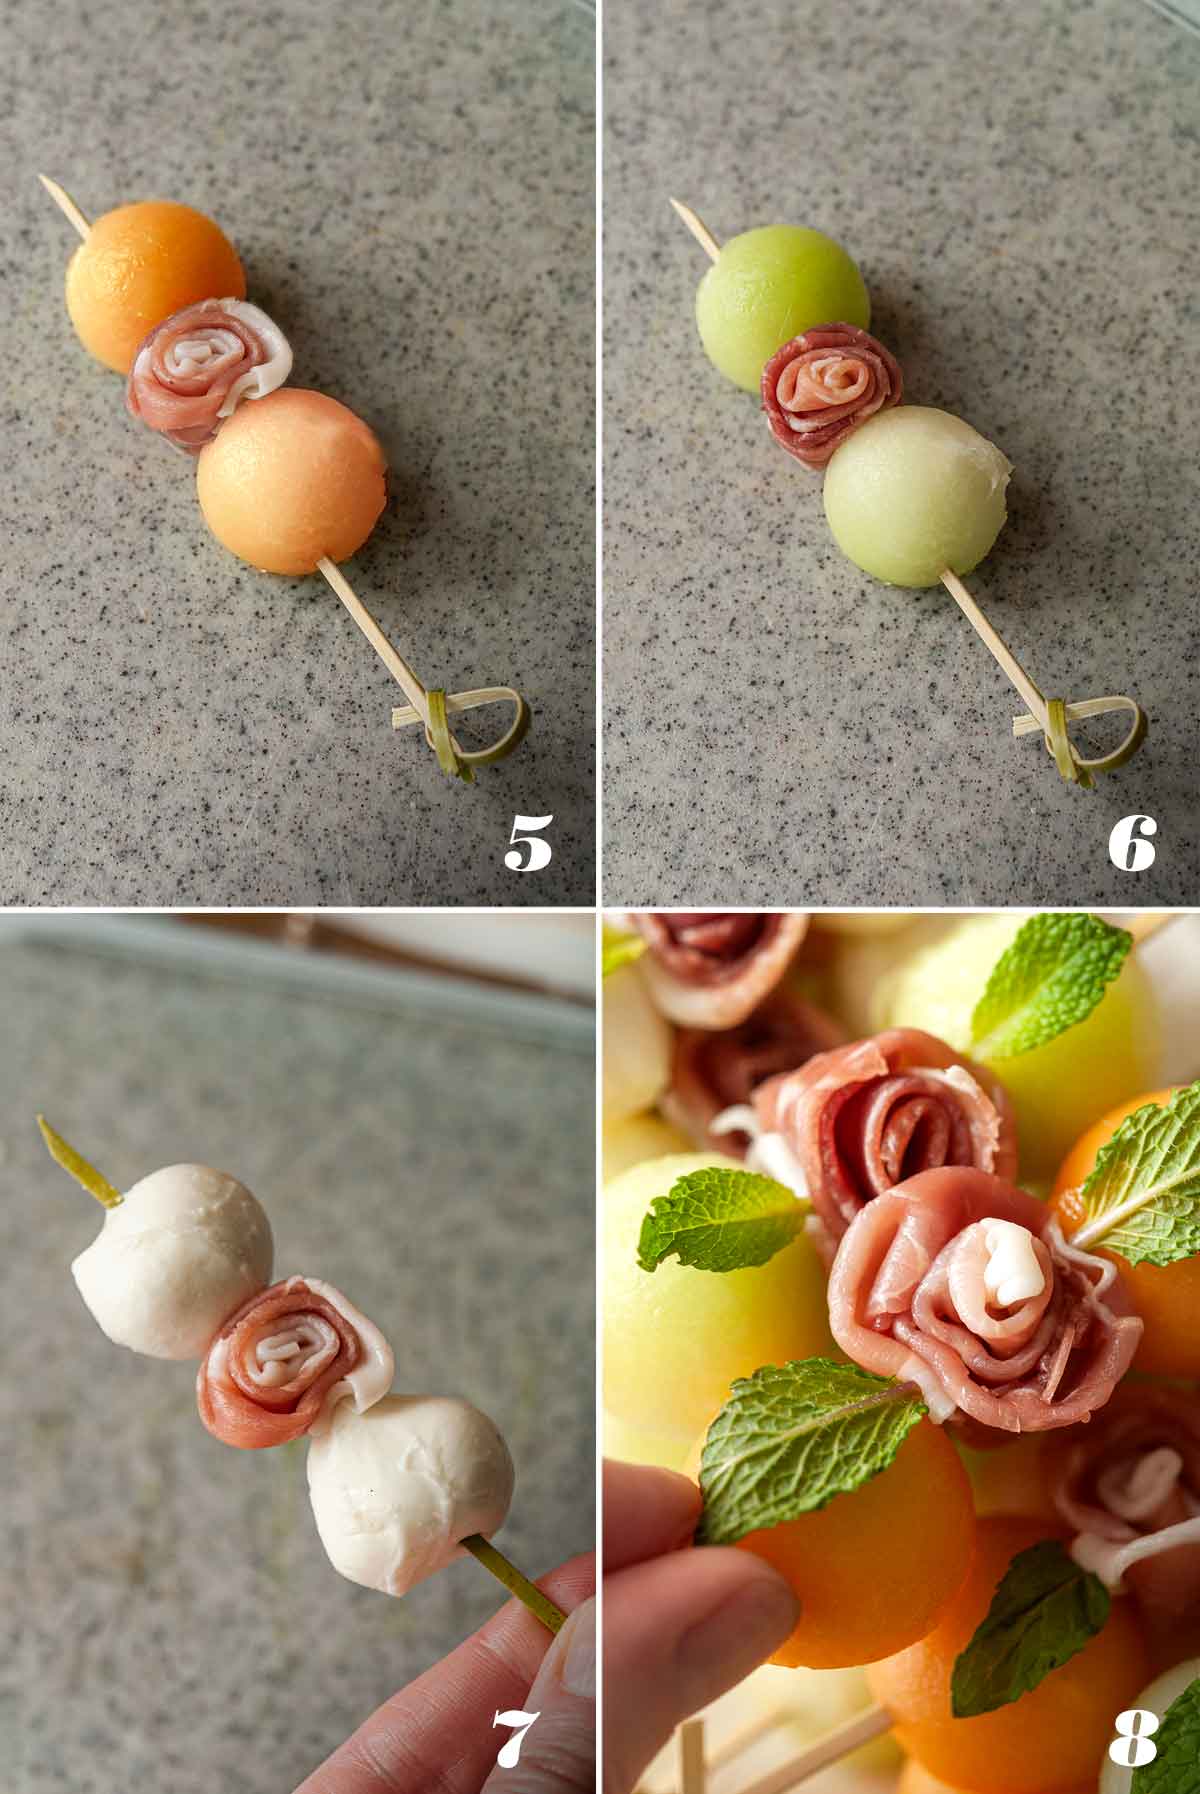 A collage of 4 numbered images showing how to make melon skewers.